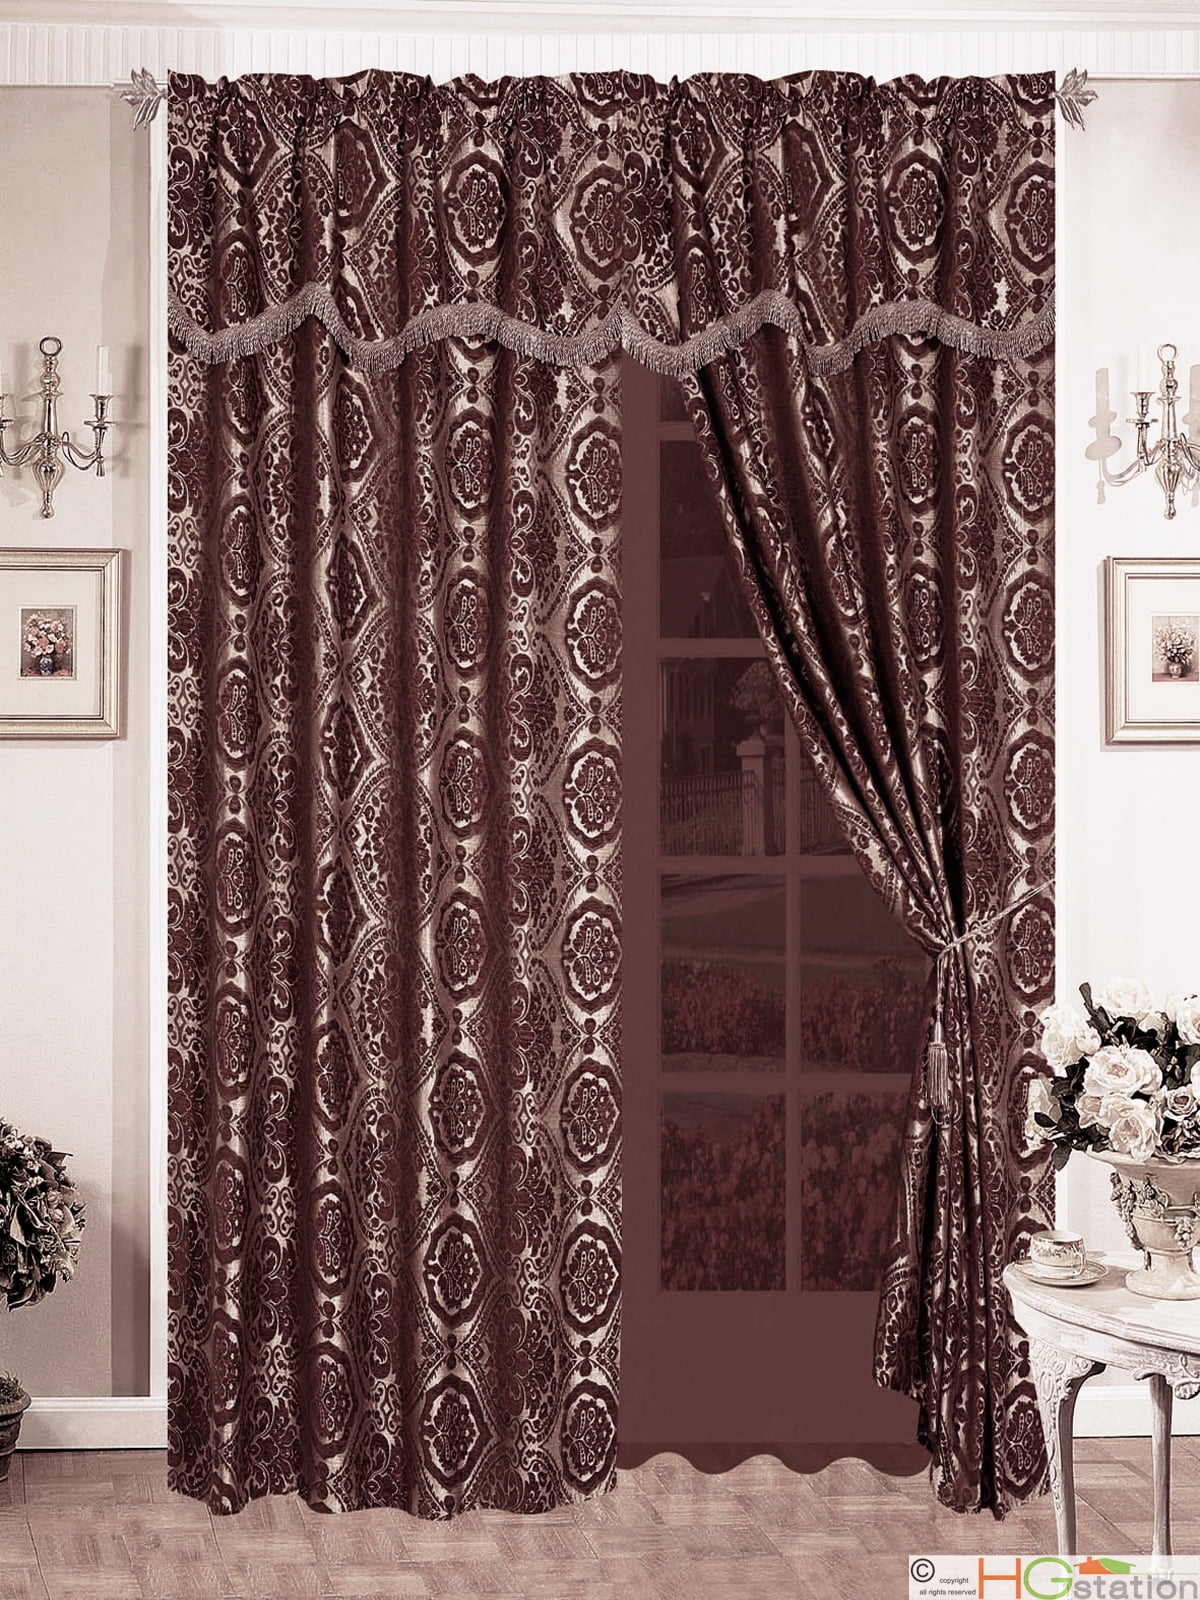 4Pc Quality Chenille Floral Damask Flocking Curtain Set Brown Gold Taupe Valance 